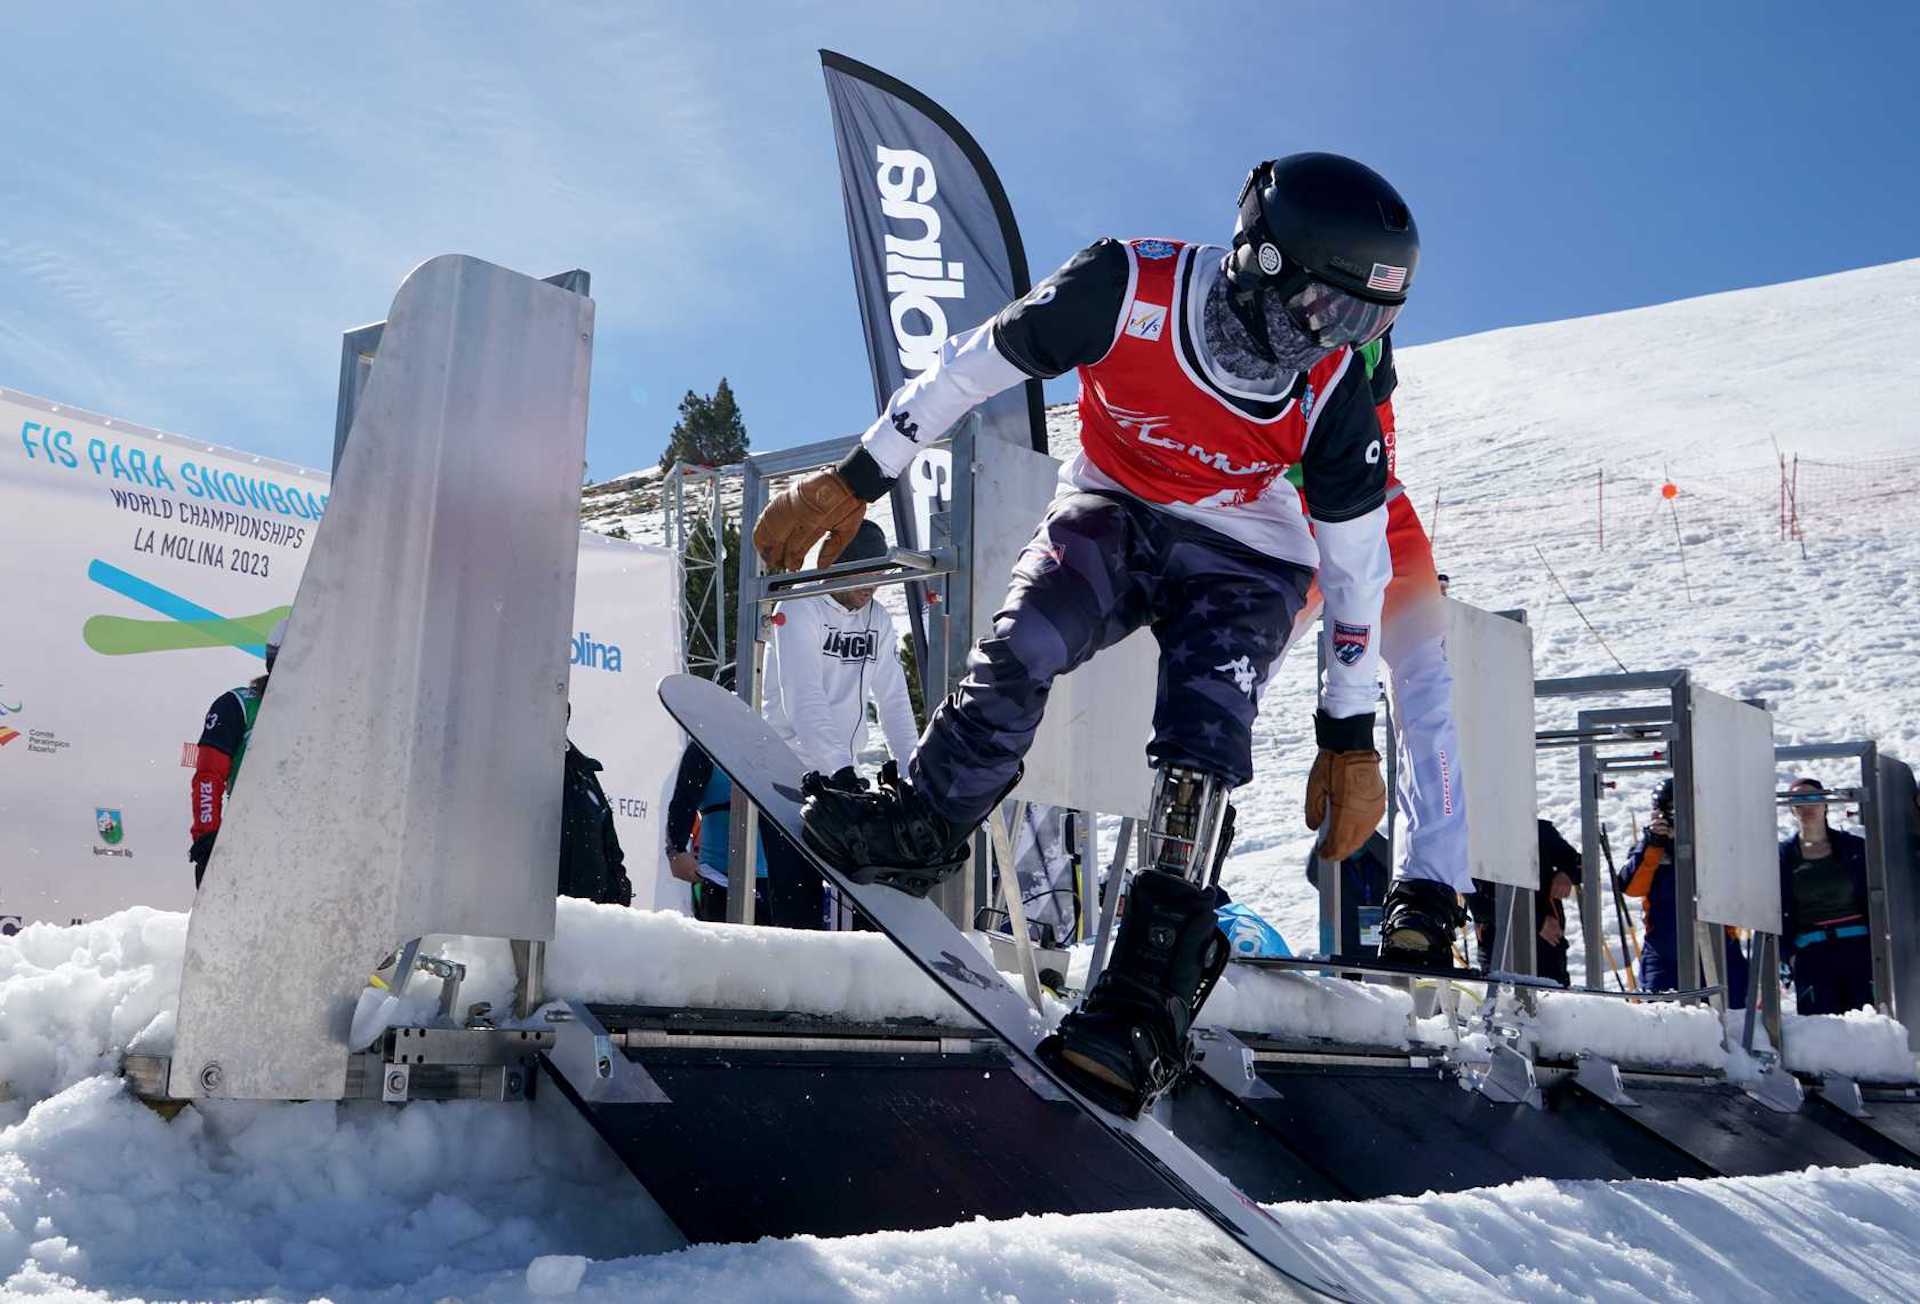 U.S. Para Snowboard athlete pushes out of the gate during a snowboardcross race